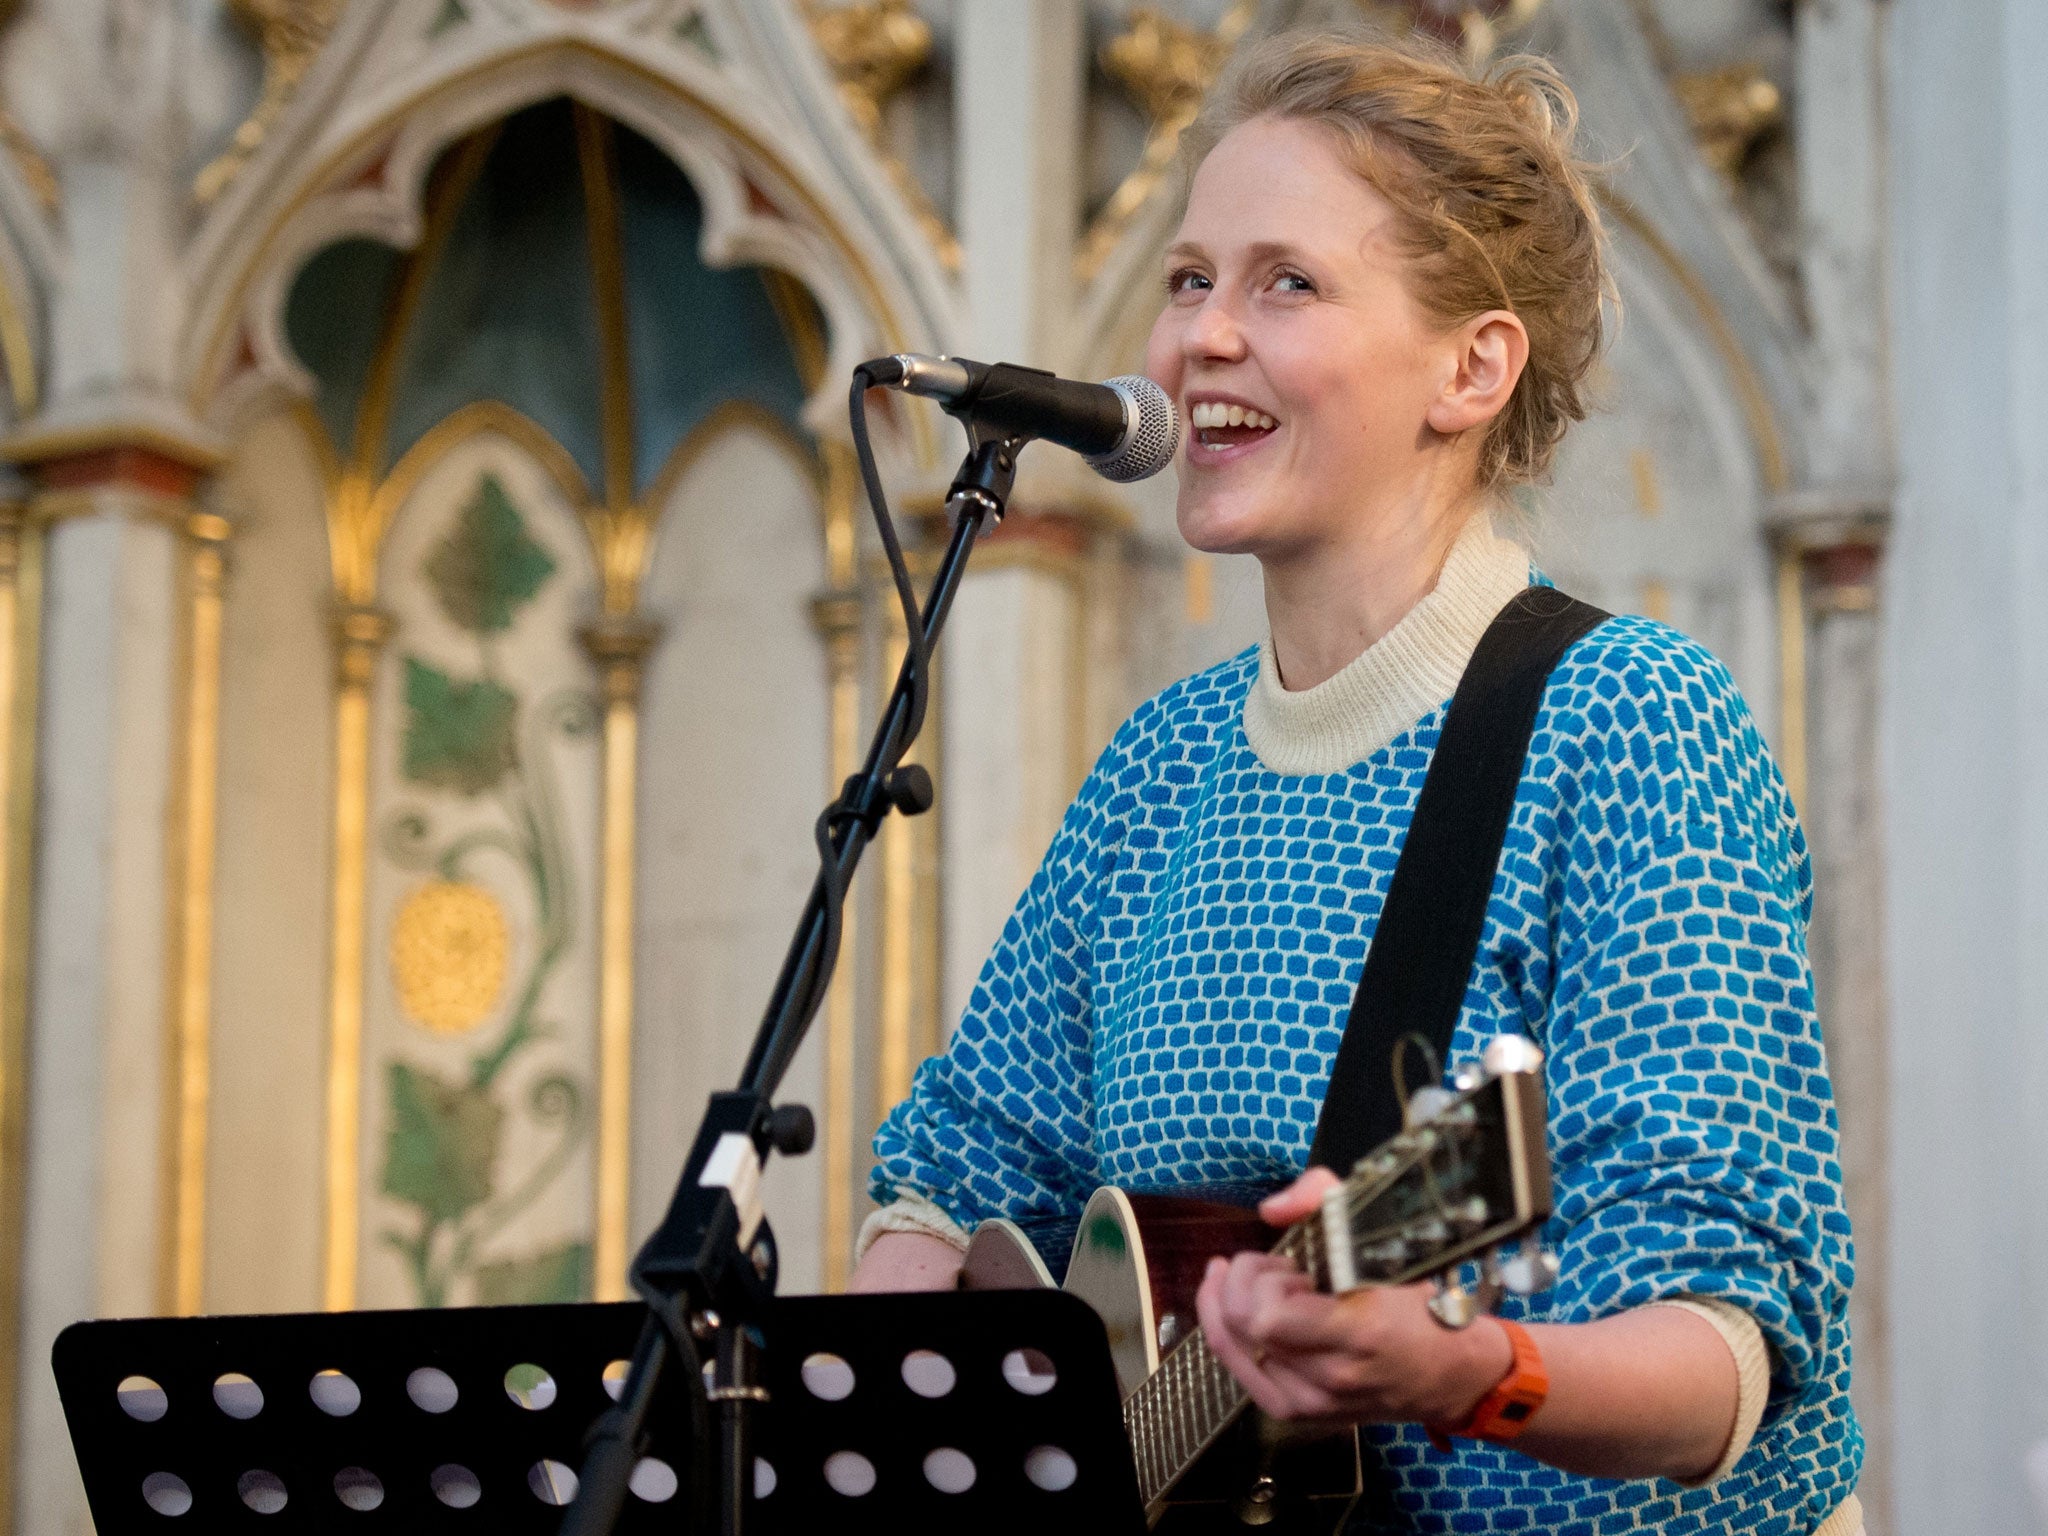 High spirits: comedian Pippa Evans, co-founder of the Sunday Assembly